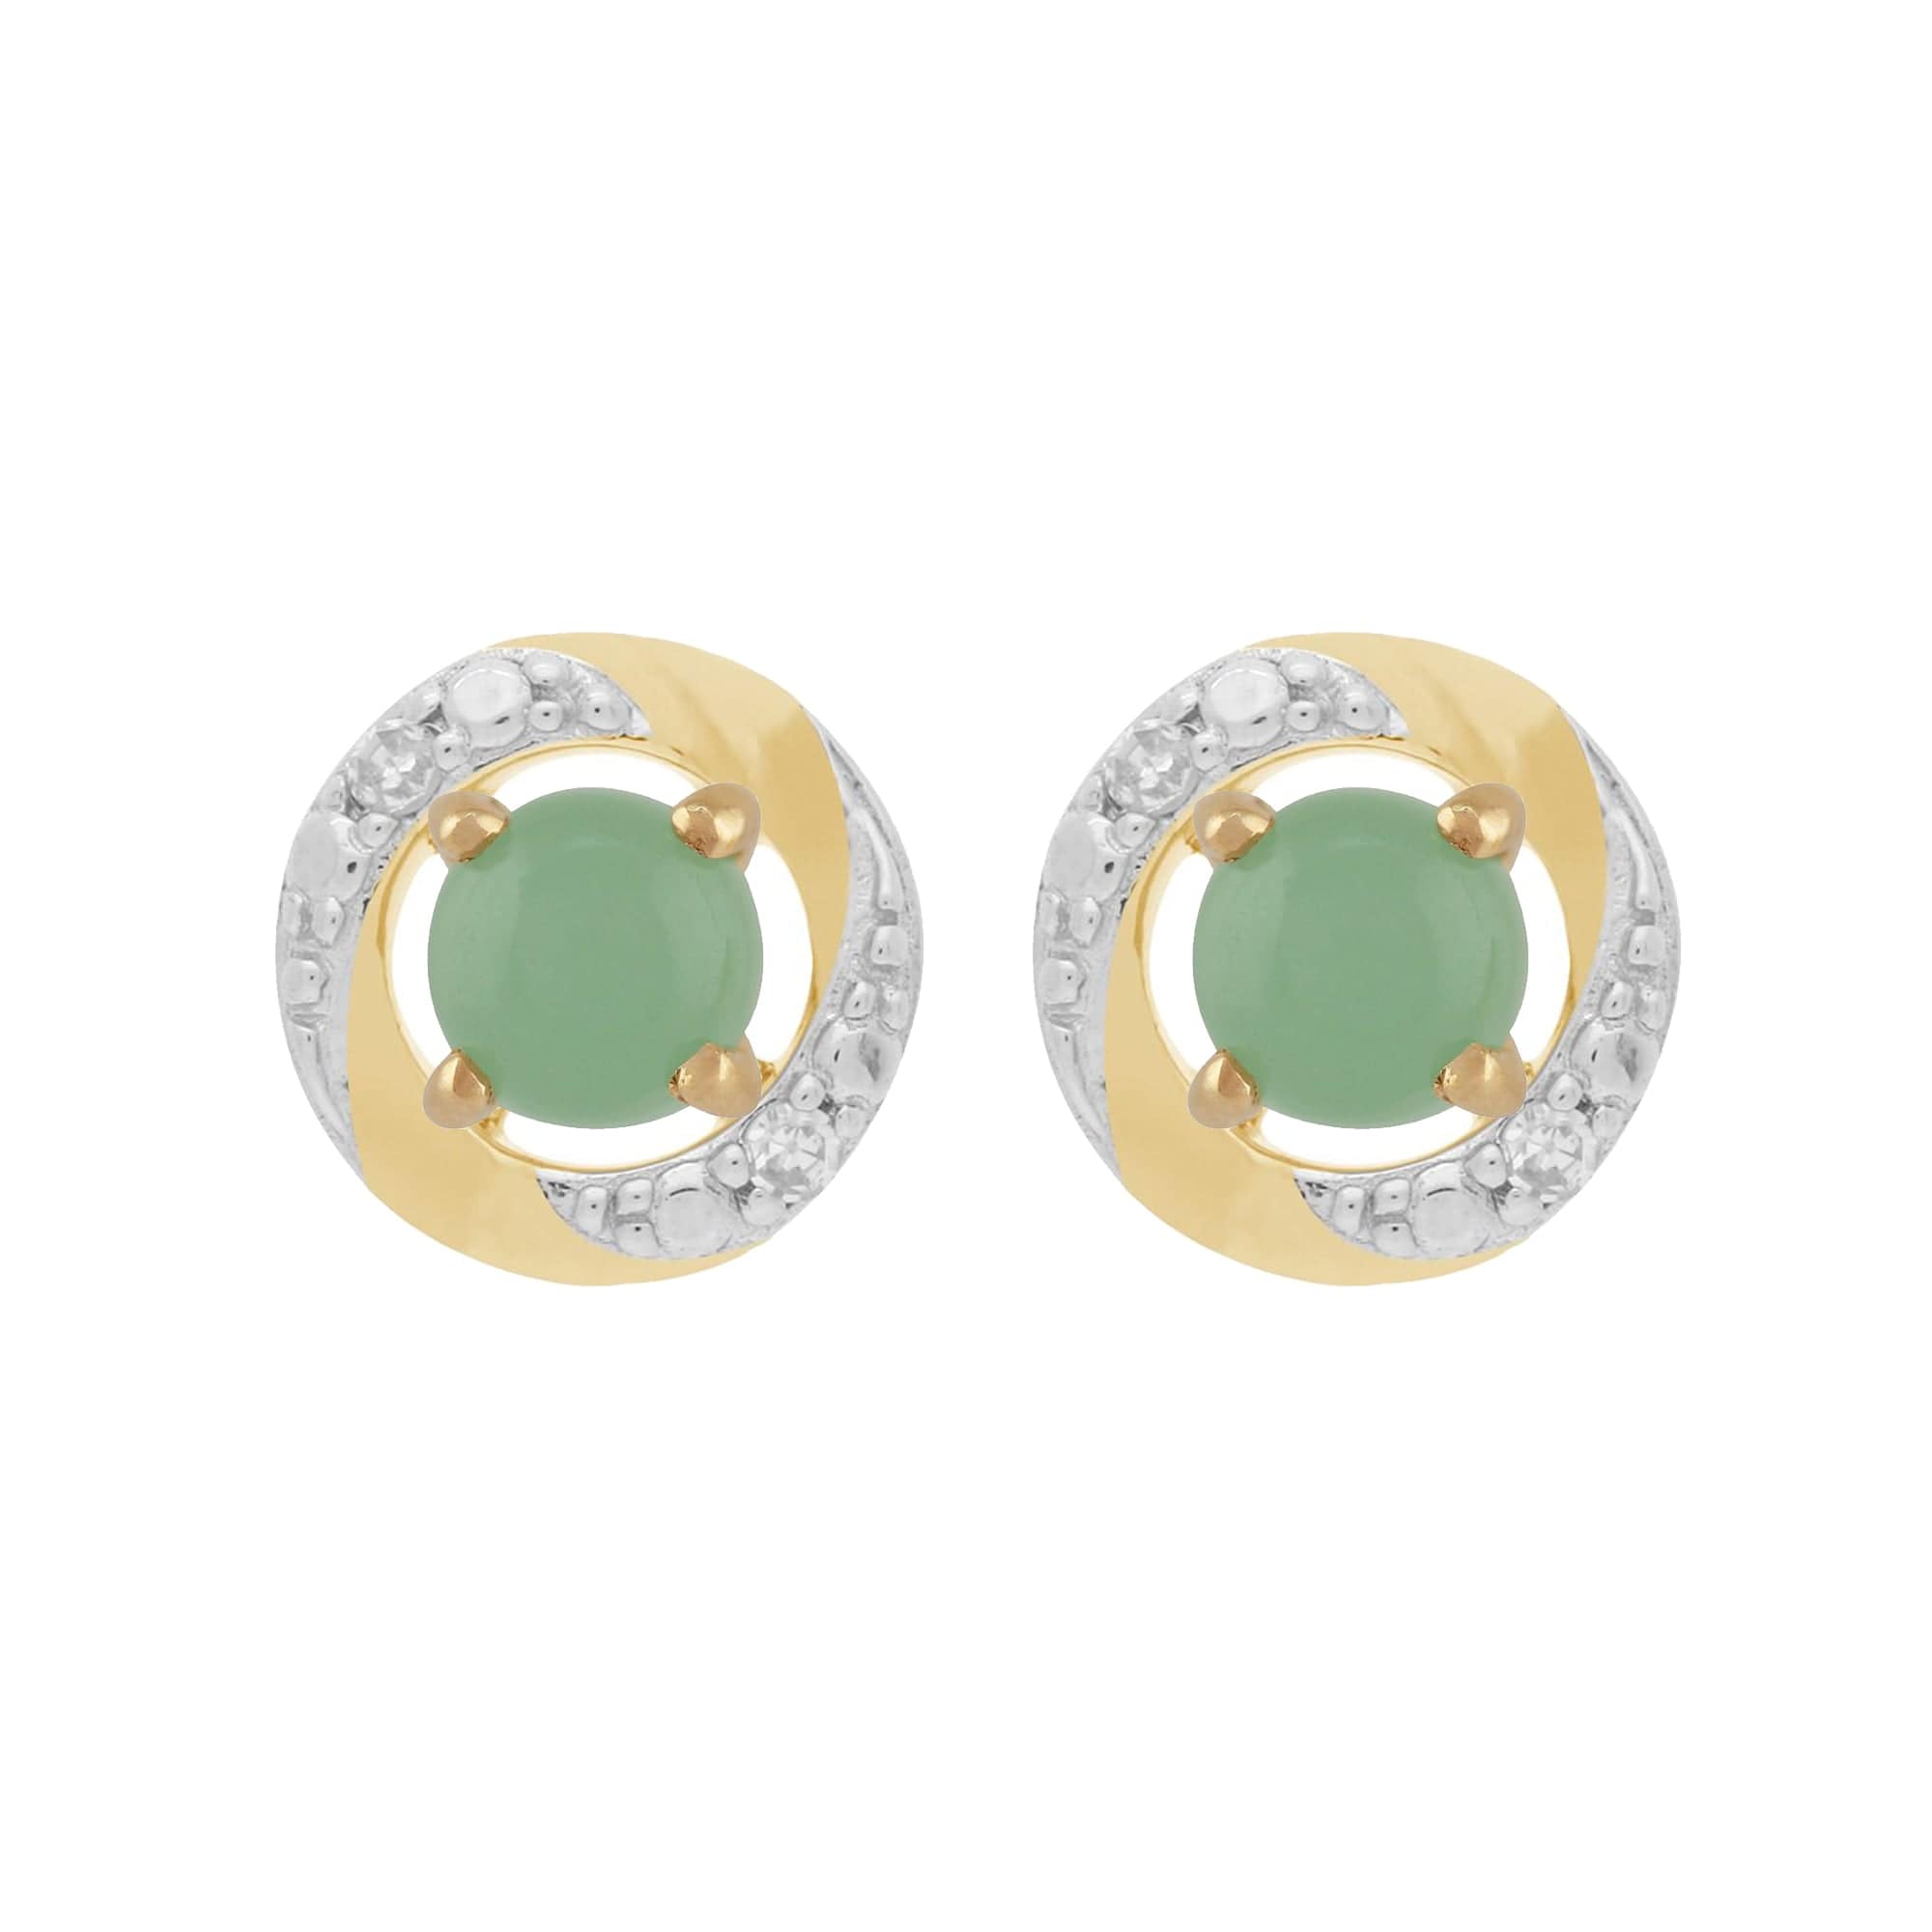 26943-191E0374019 Classic Round Jade Studs with Detachable Diamond Halo Ear Jacket in 9ct Yellow Gold 1